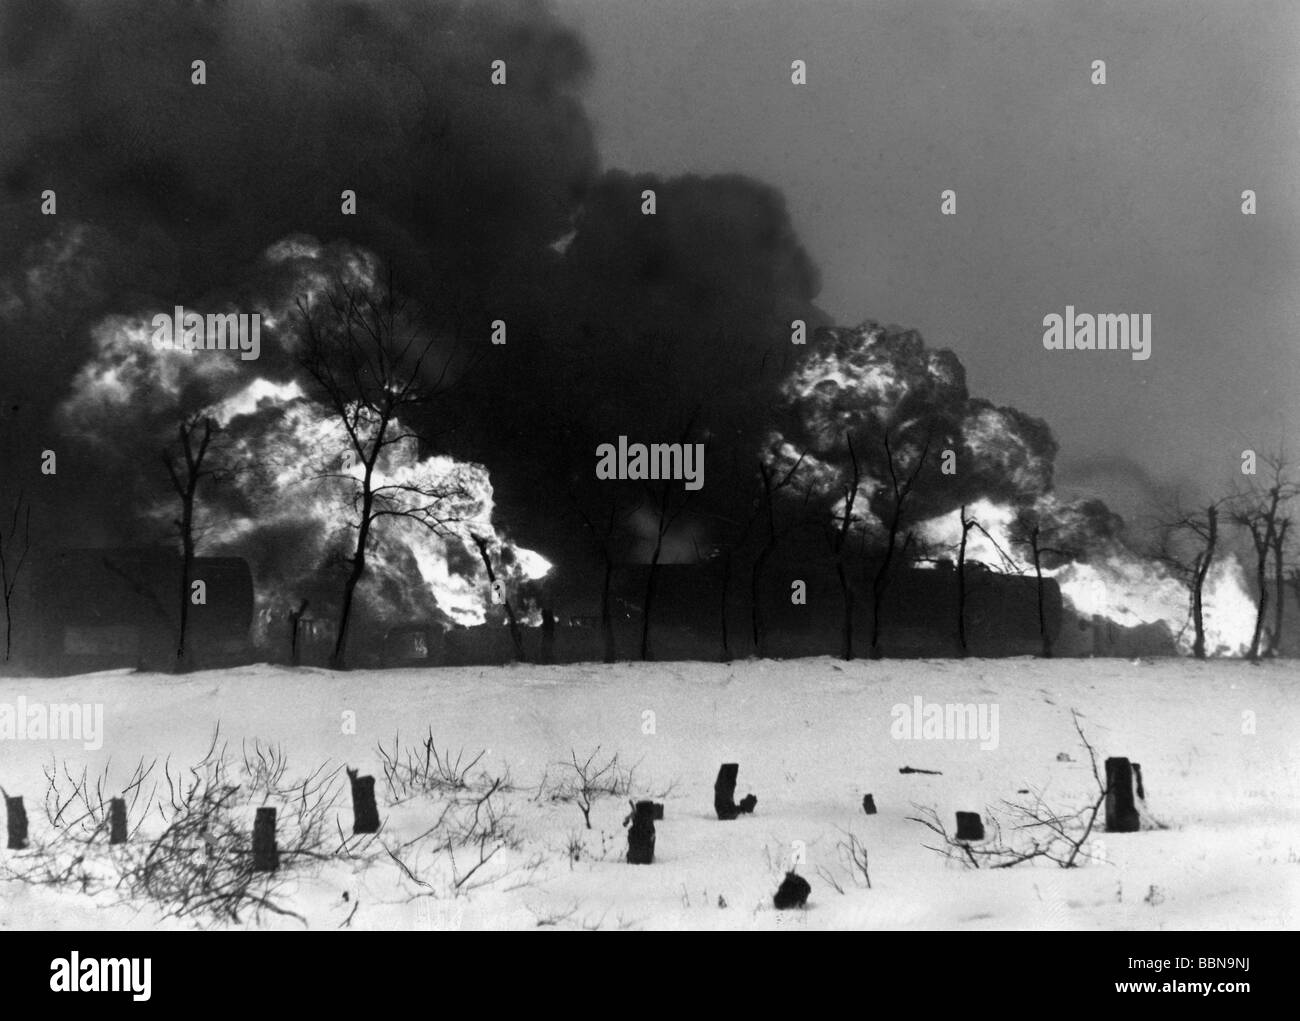 events, Second World War / WWII, Russia 1942 / 1943, burning Soviet village after fierce fightings, near Stalino, Donets Basin, February 1943, 20th century, Eastern Front, historic, historical, destruction, fire, Soviet Union, USSR, winter, 1940s, Stock Photo